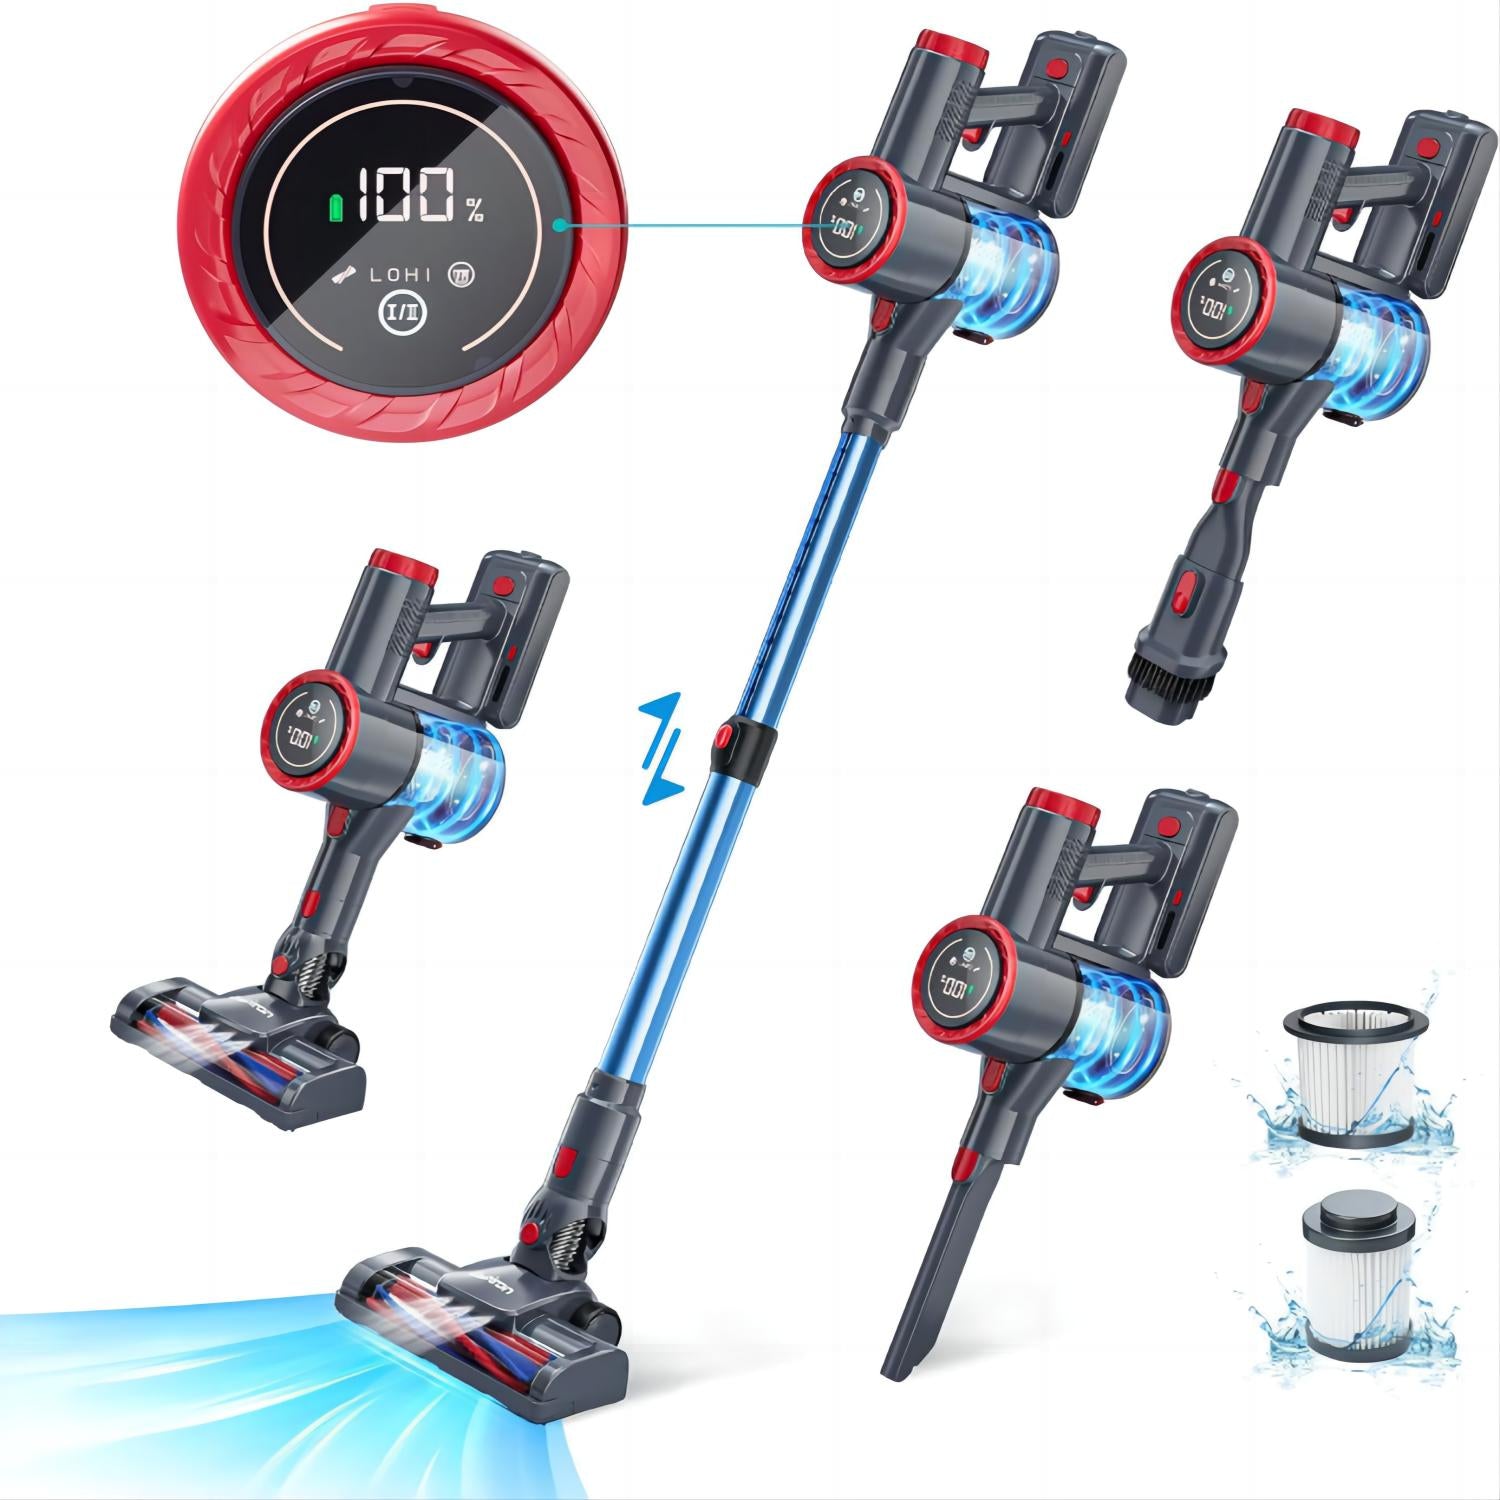 ASPIRON® Cordless Vacuum Cleaner  CA028，45 min Runtime with large LED Touch Display2024